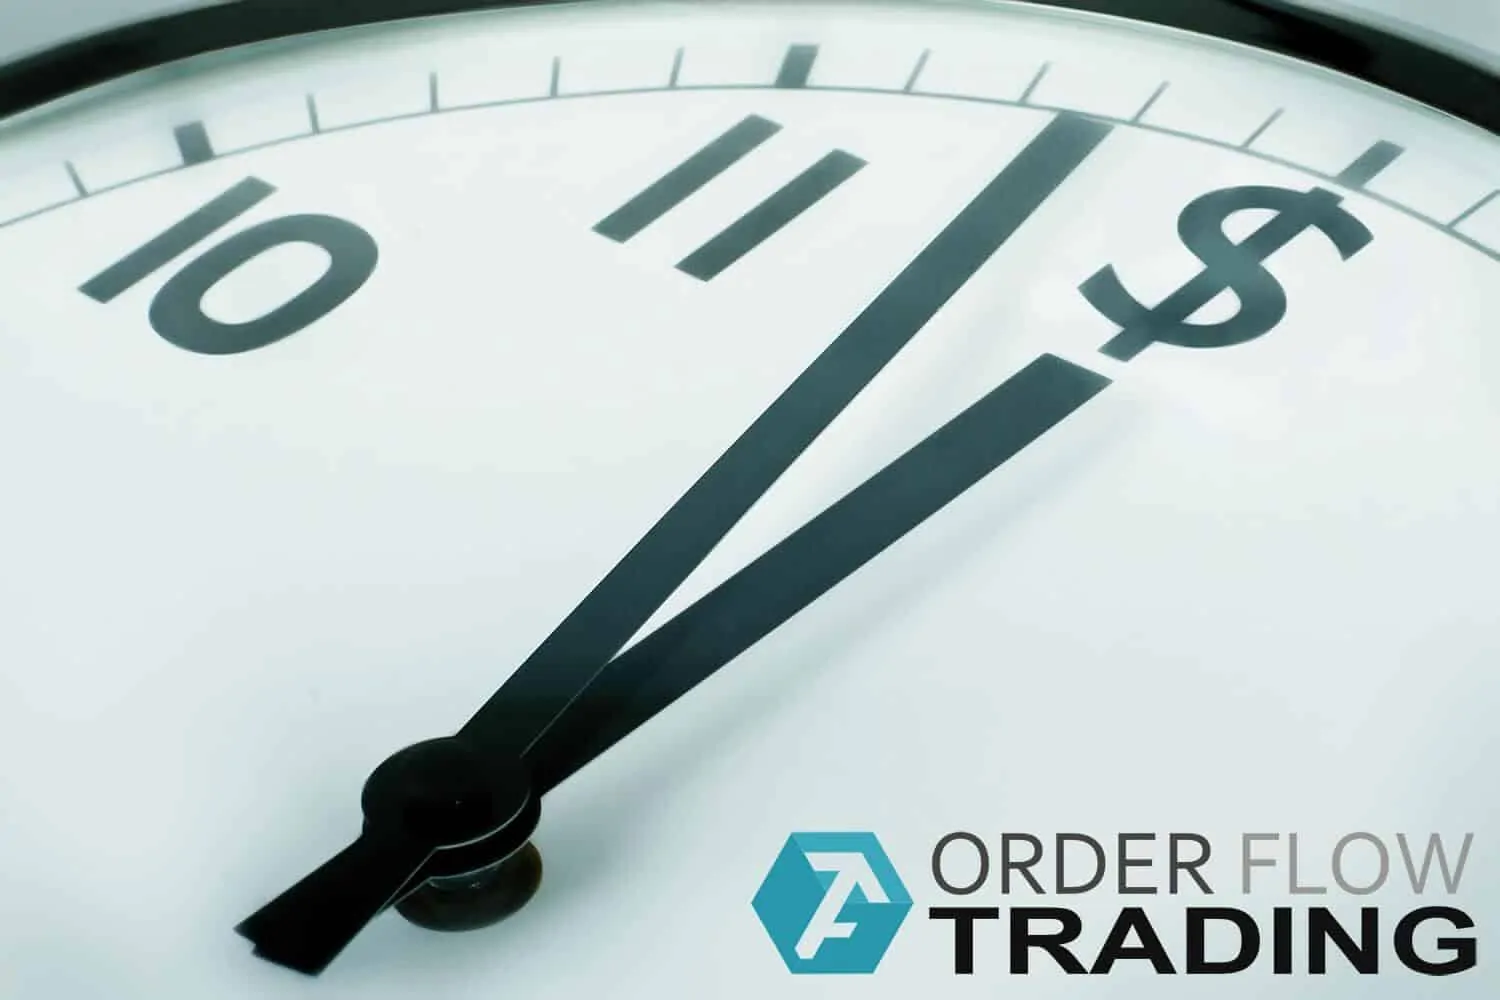 Three worst periods of time for trading